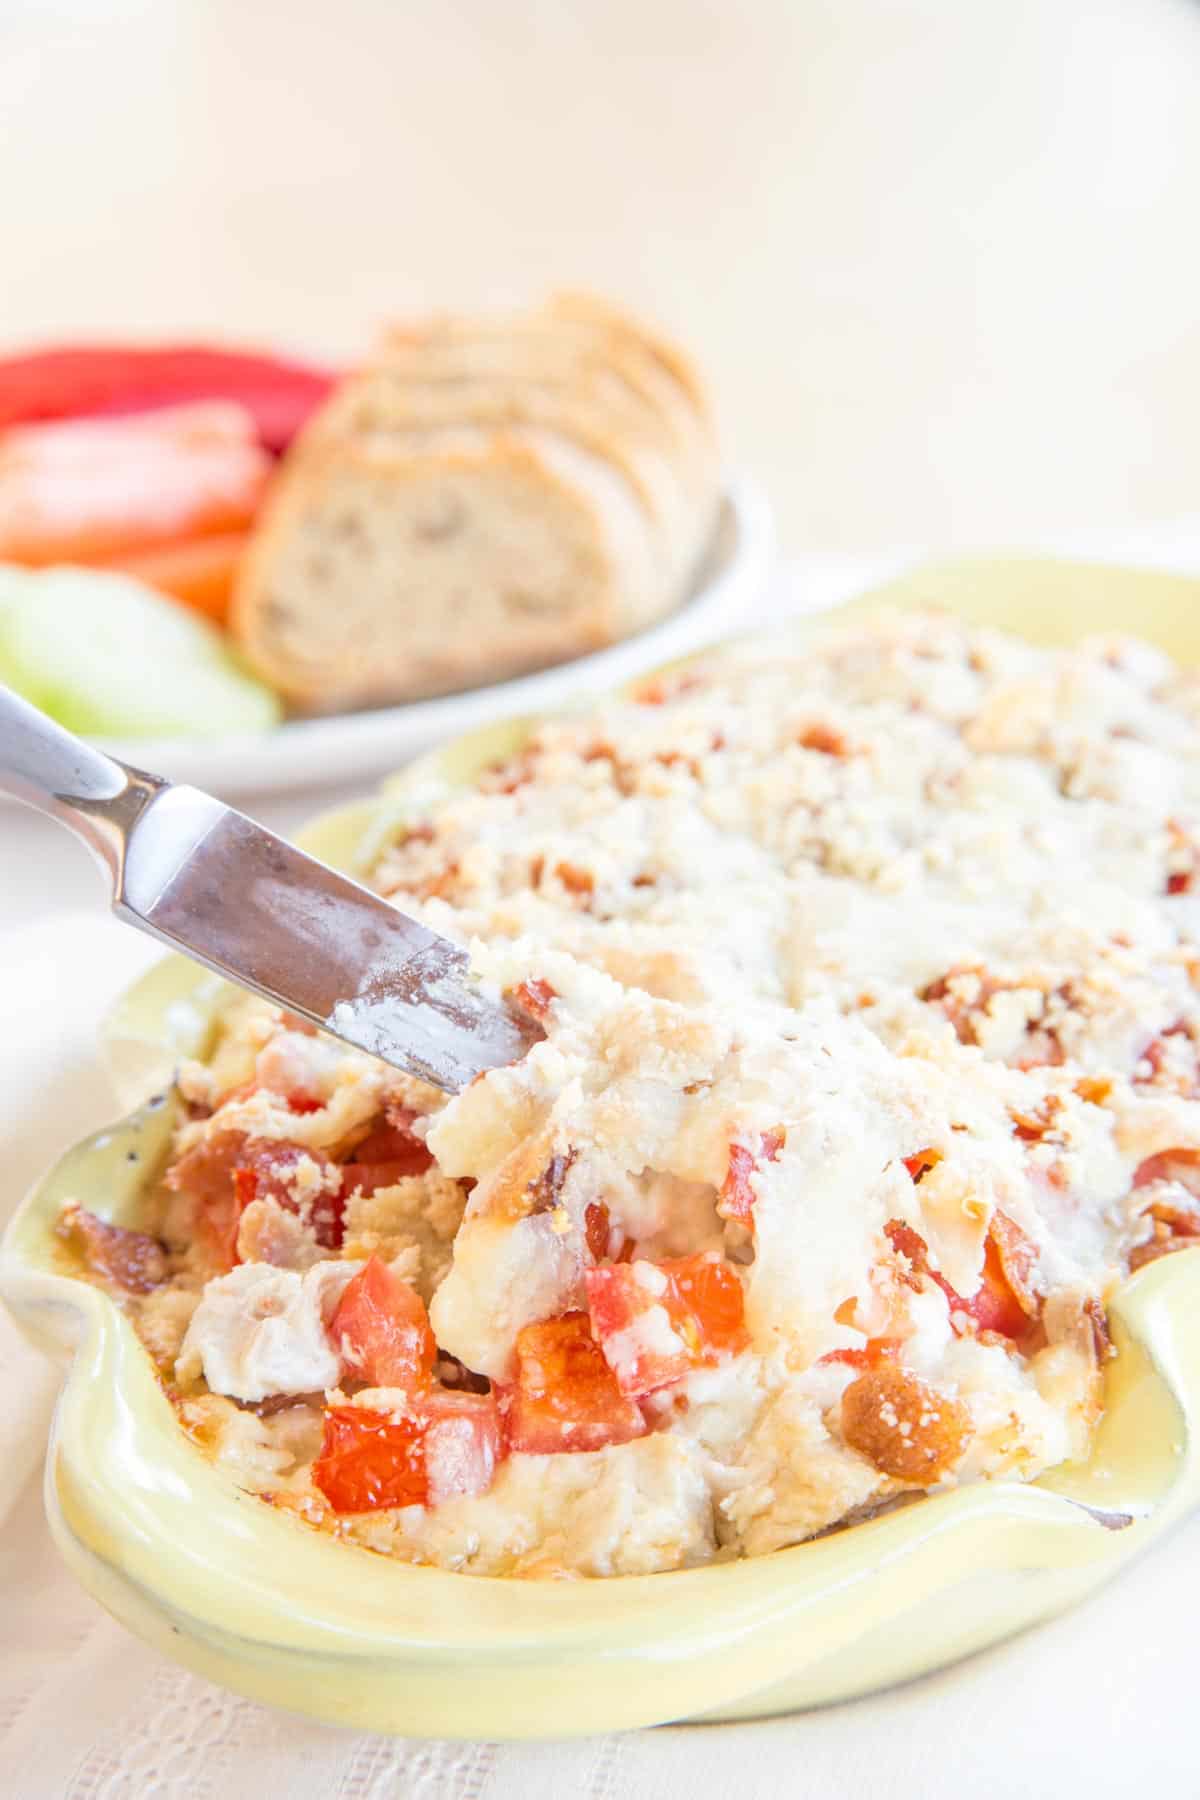 Hot cheesy dip filled with turkey, bacon, and tomatoes in a yellow casserole dish